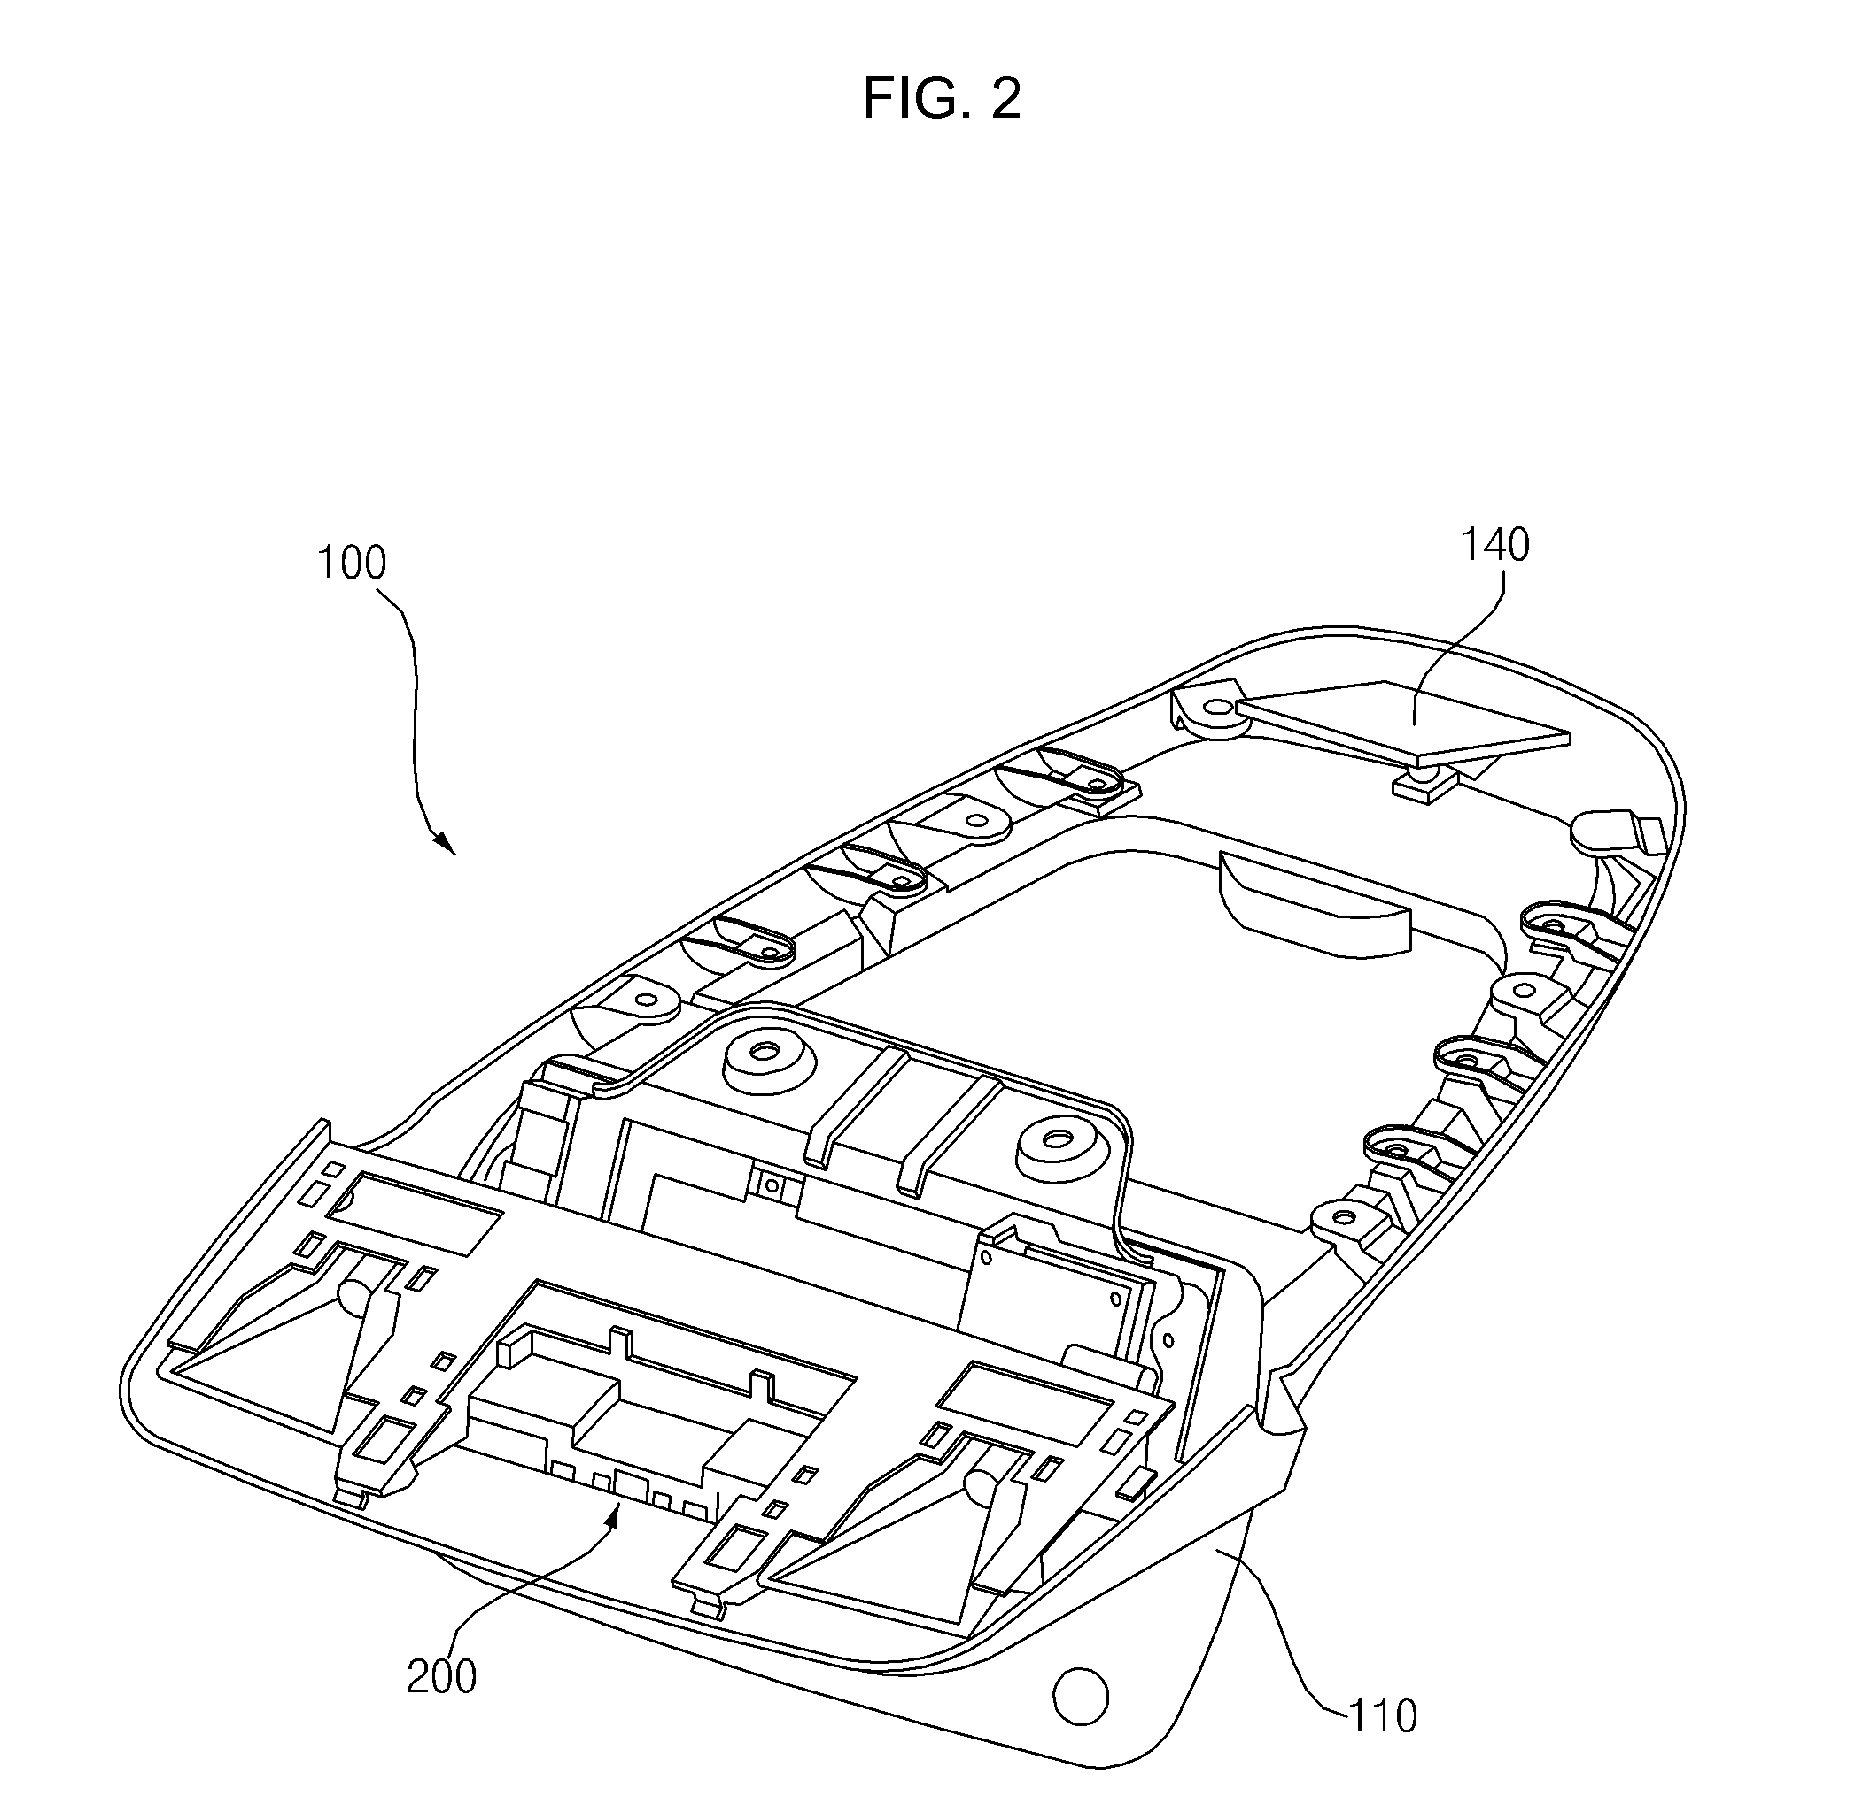 Integrated Overhead Console Assembly for Vehicle